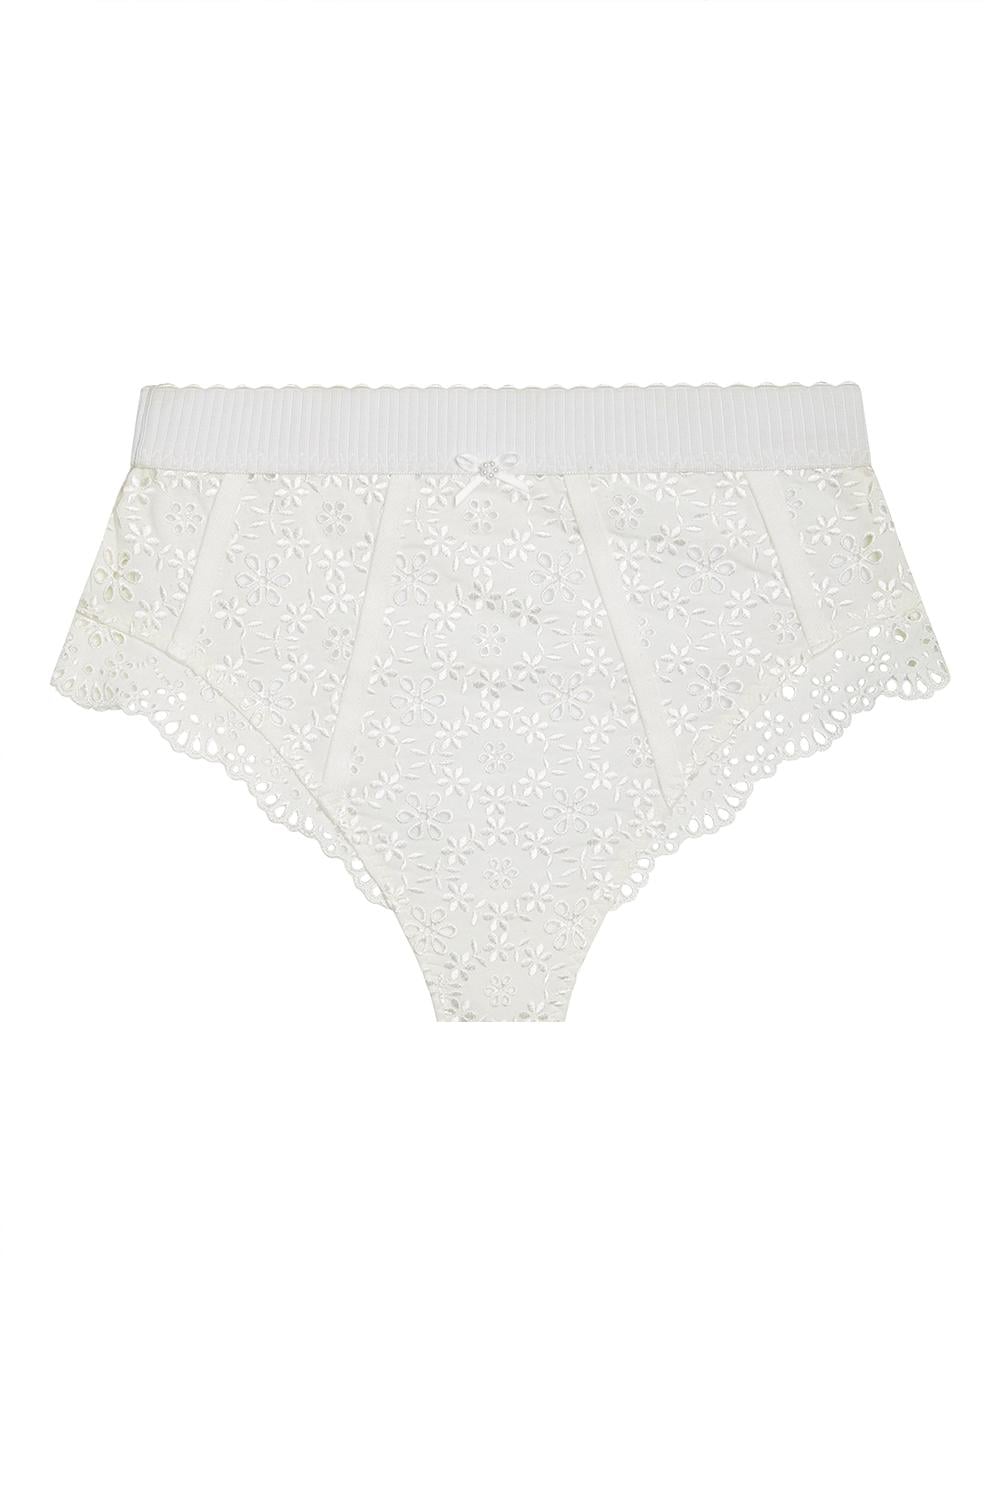 For Love & Lemons Sophie Eyelet High-Waist Panty, 9 Comfy Lingerie Trends  We're Wearing On Repeat at Home